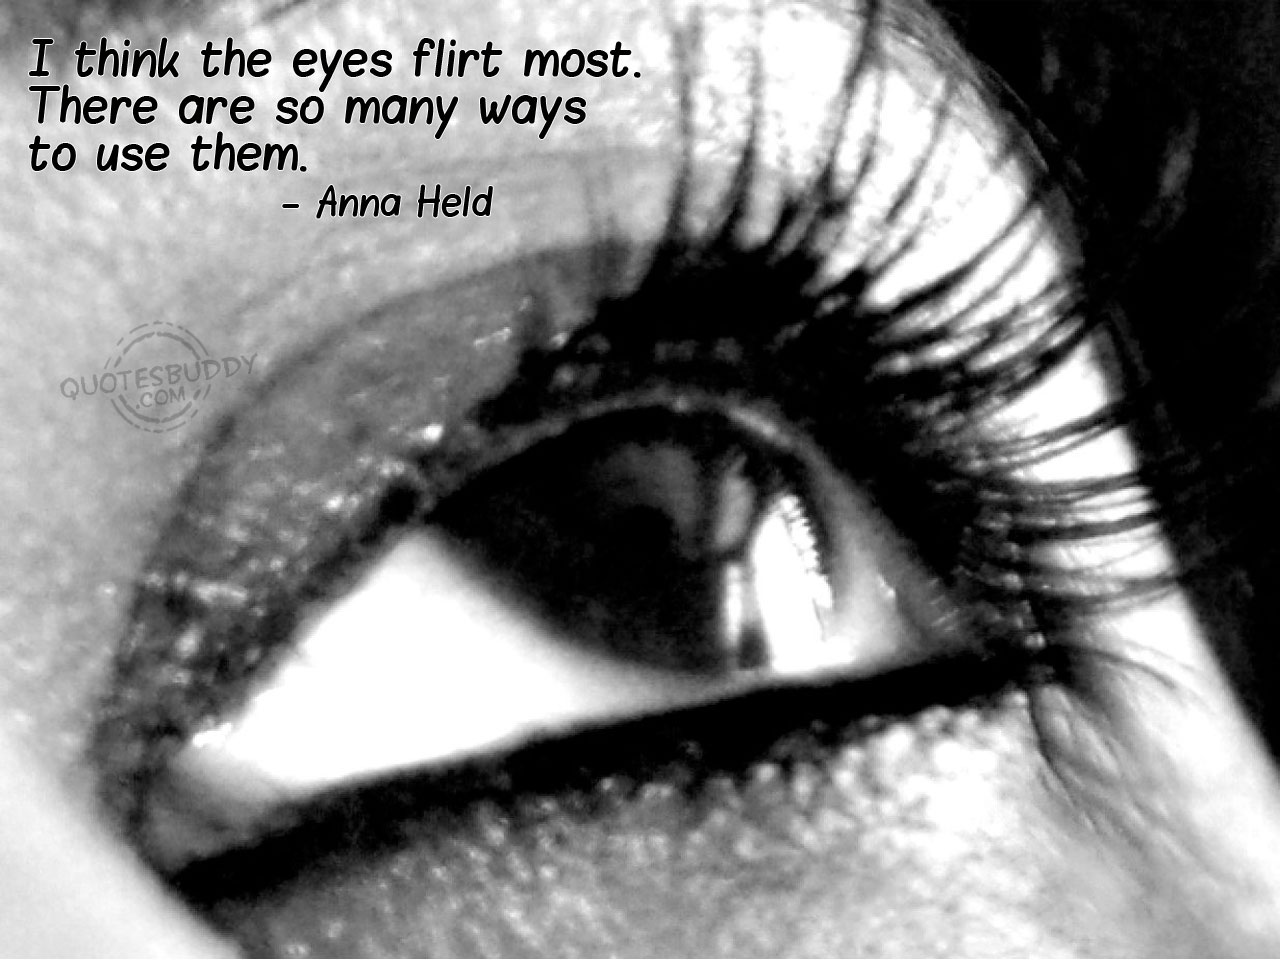 I think the eyes flirt most. There are so many ways to use them. Anna Held